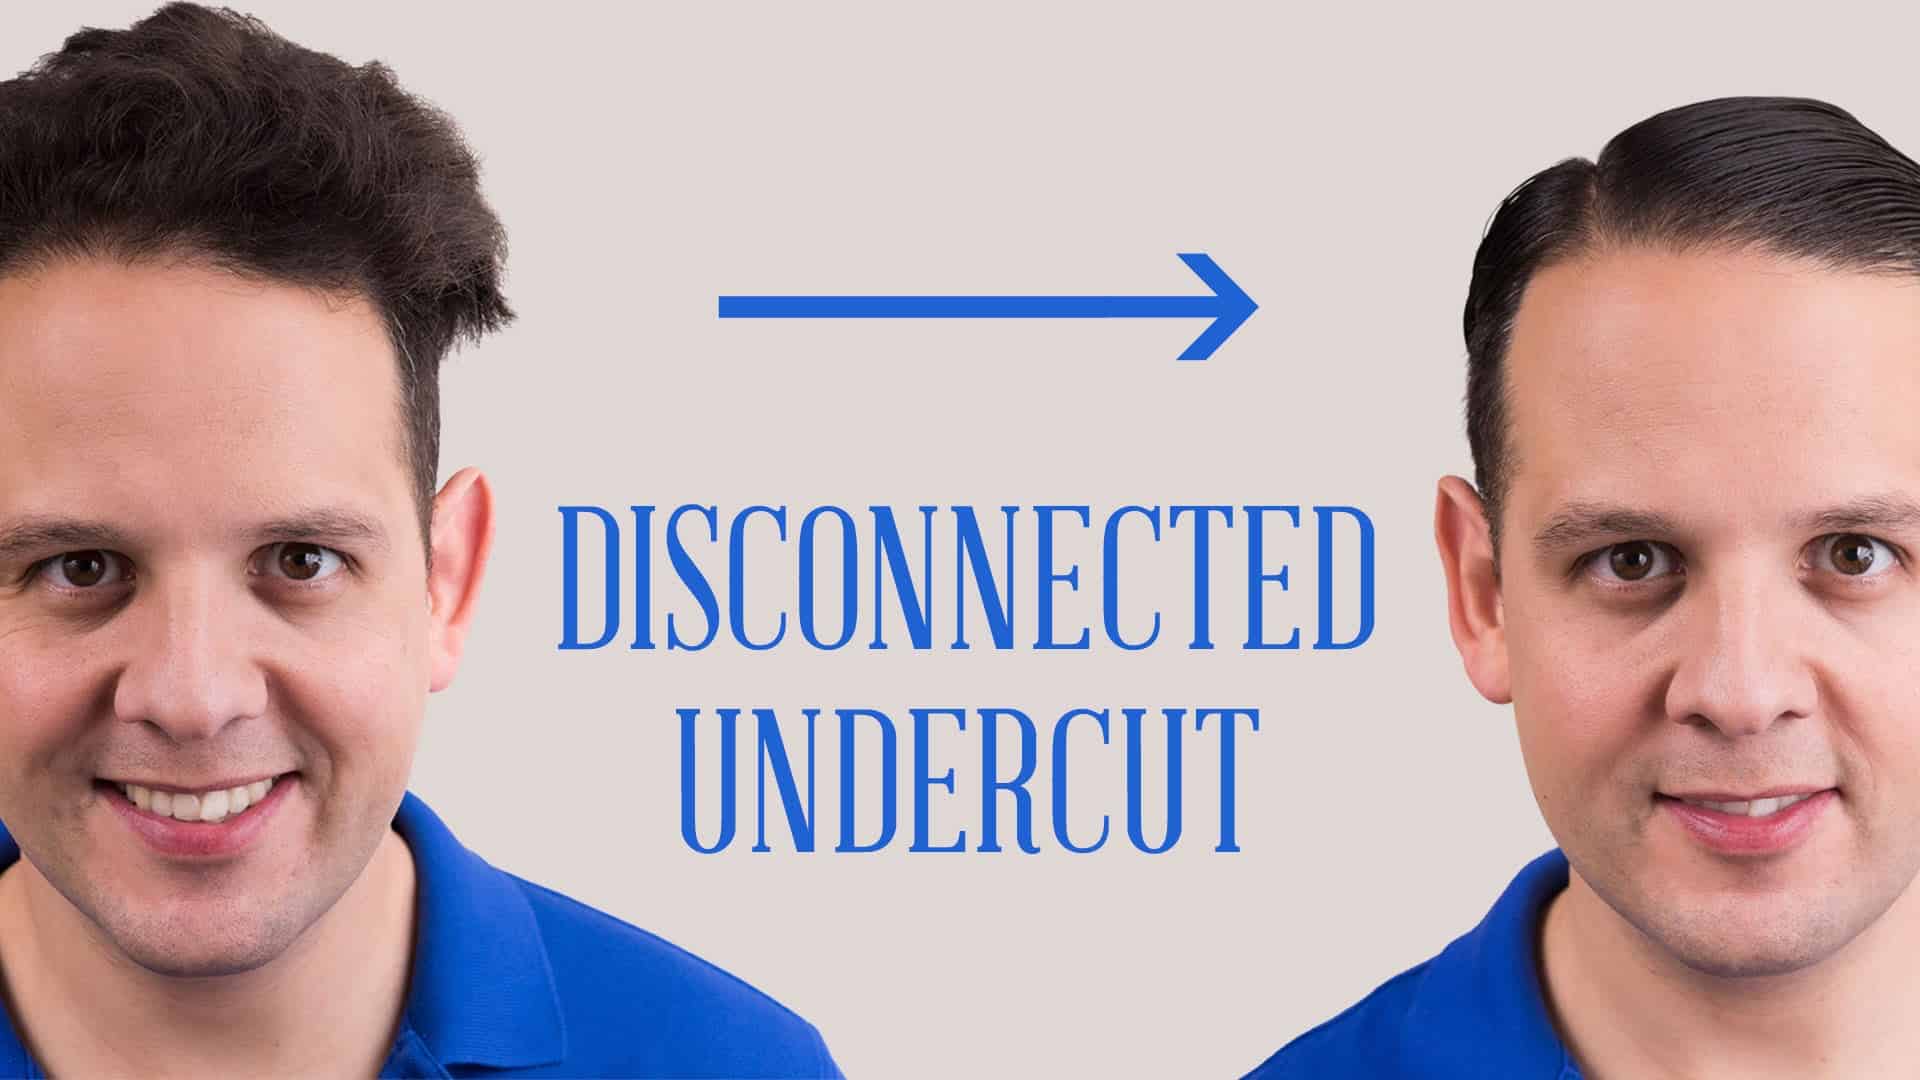 Disconnected Undercut – How To Style Hair The Gentlemans Gazette Way